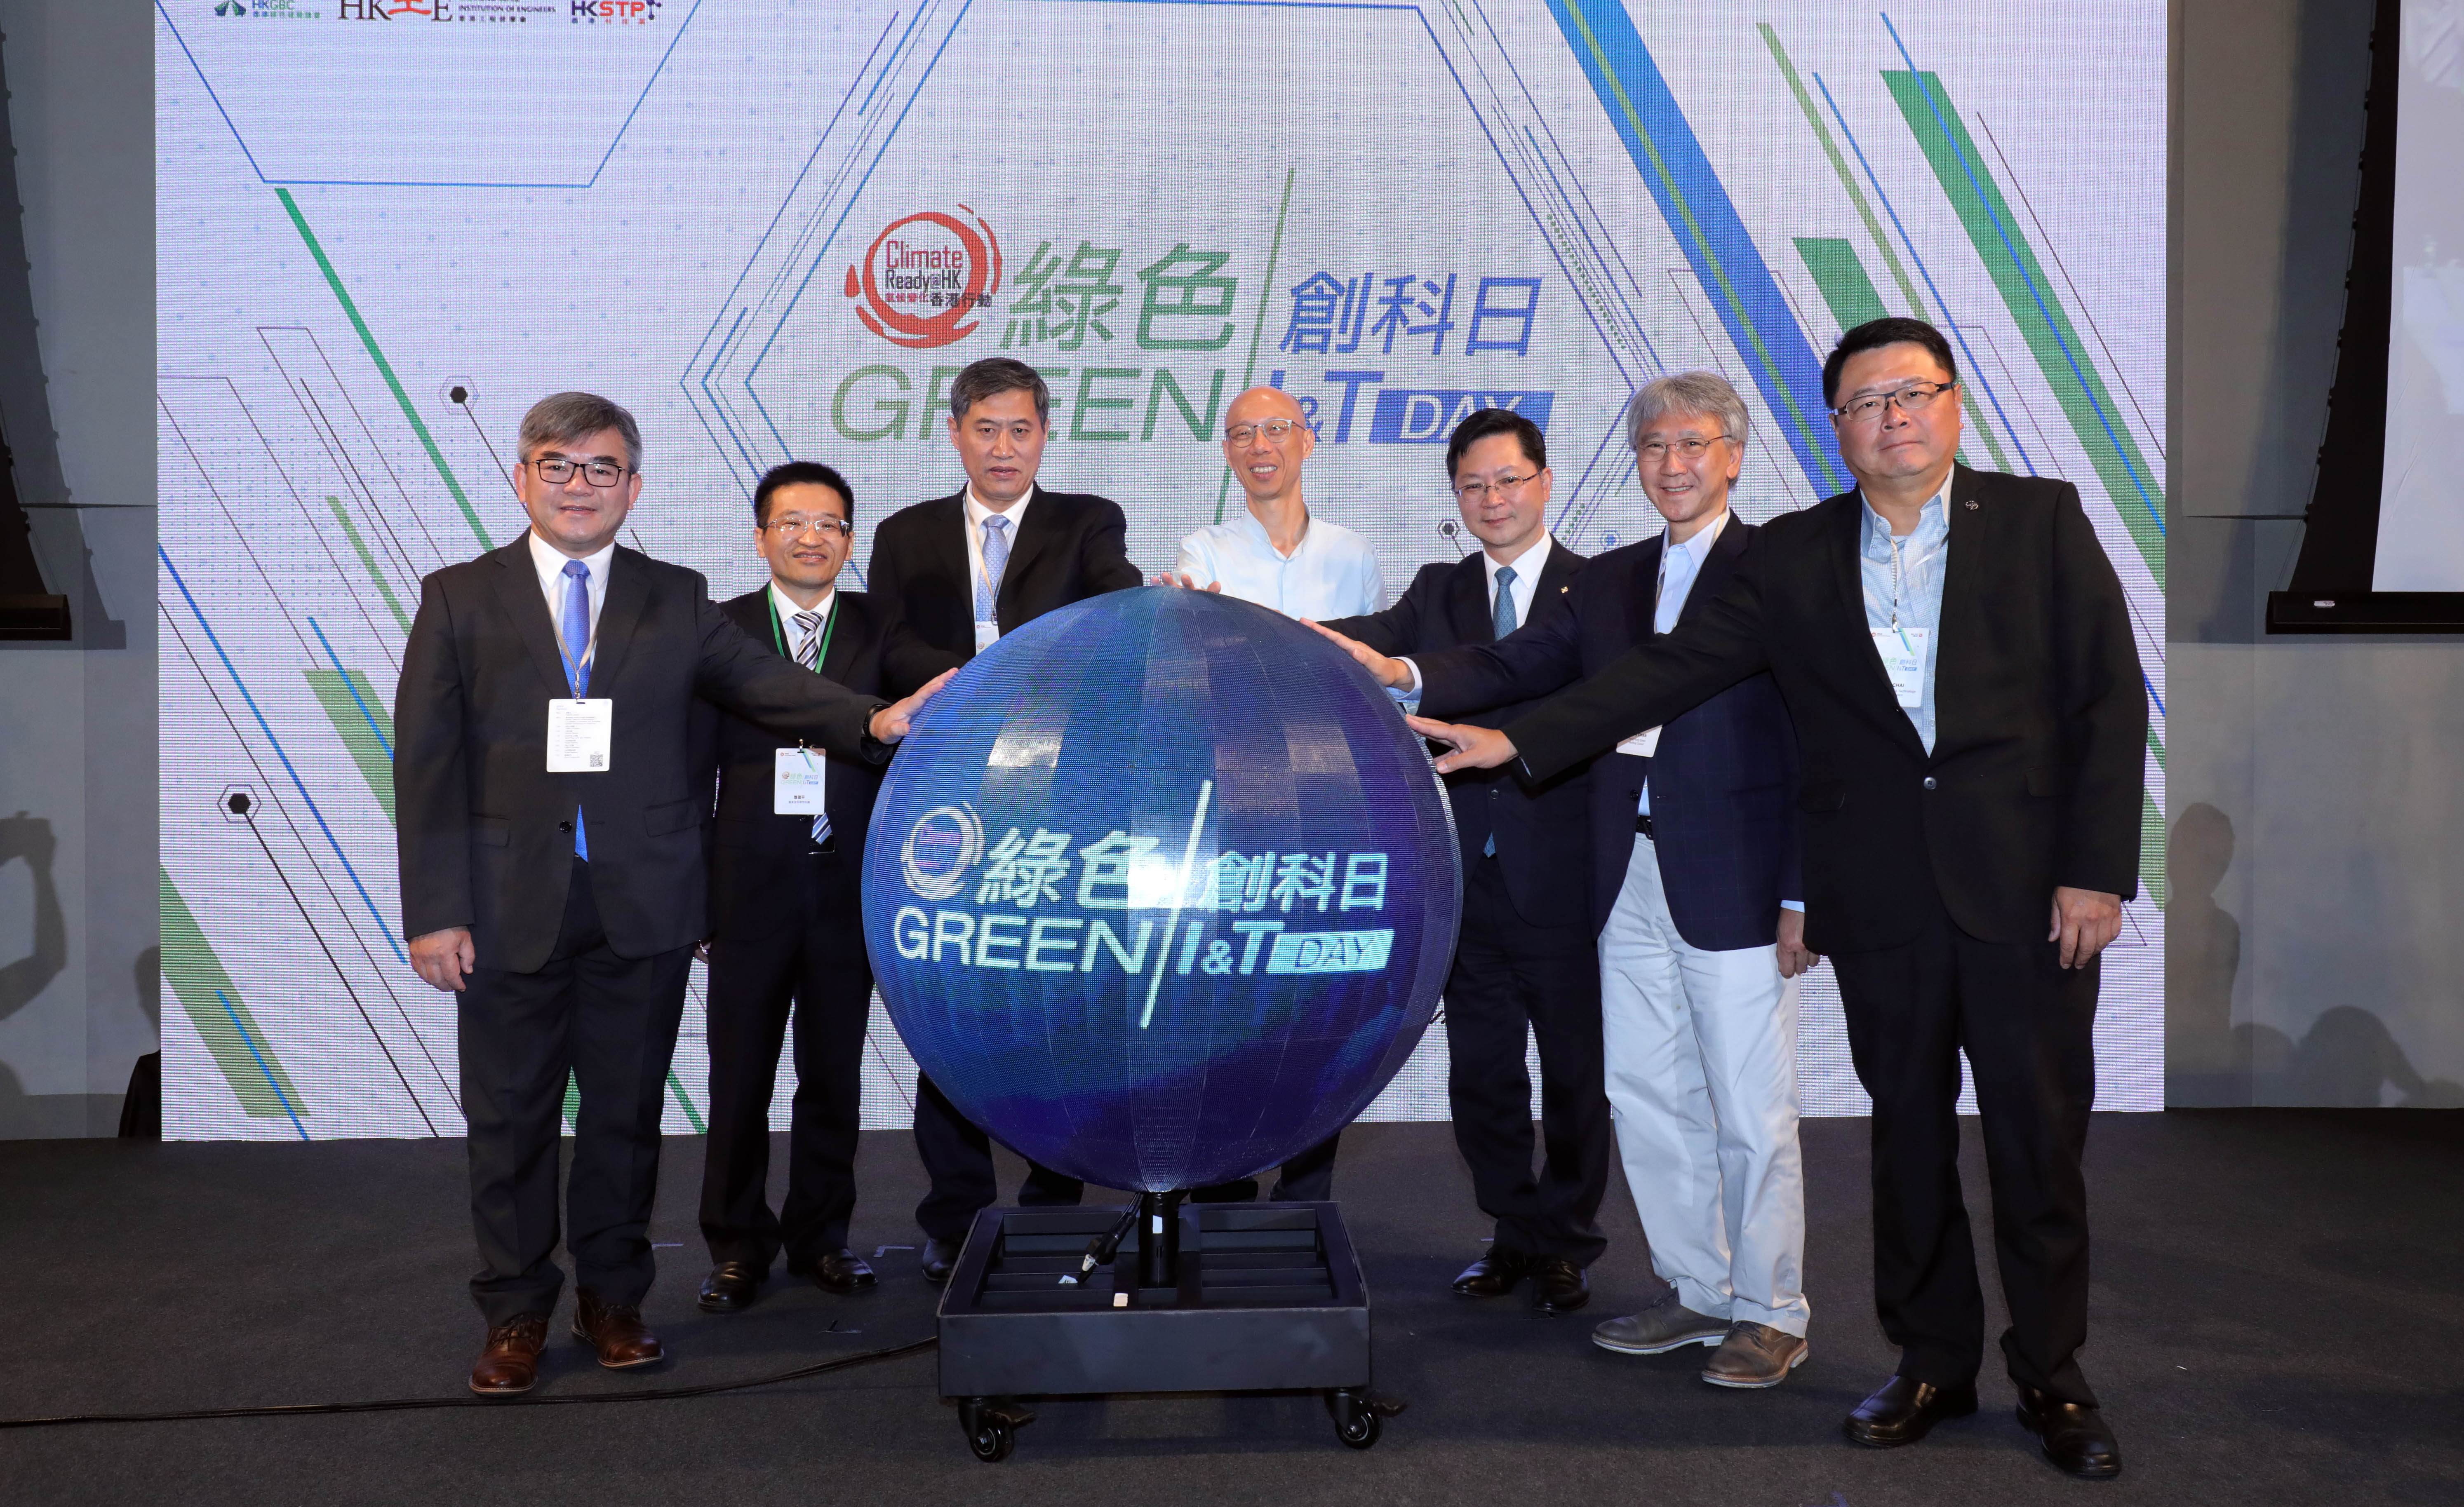 6 Aug 2019 – EMSD signed Memoranda of Co-operation (MOC) to enhance innovation and technology co-operation between Guangdong and Hong Kong on the Green I&T Day